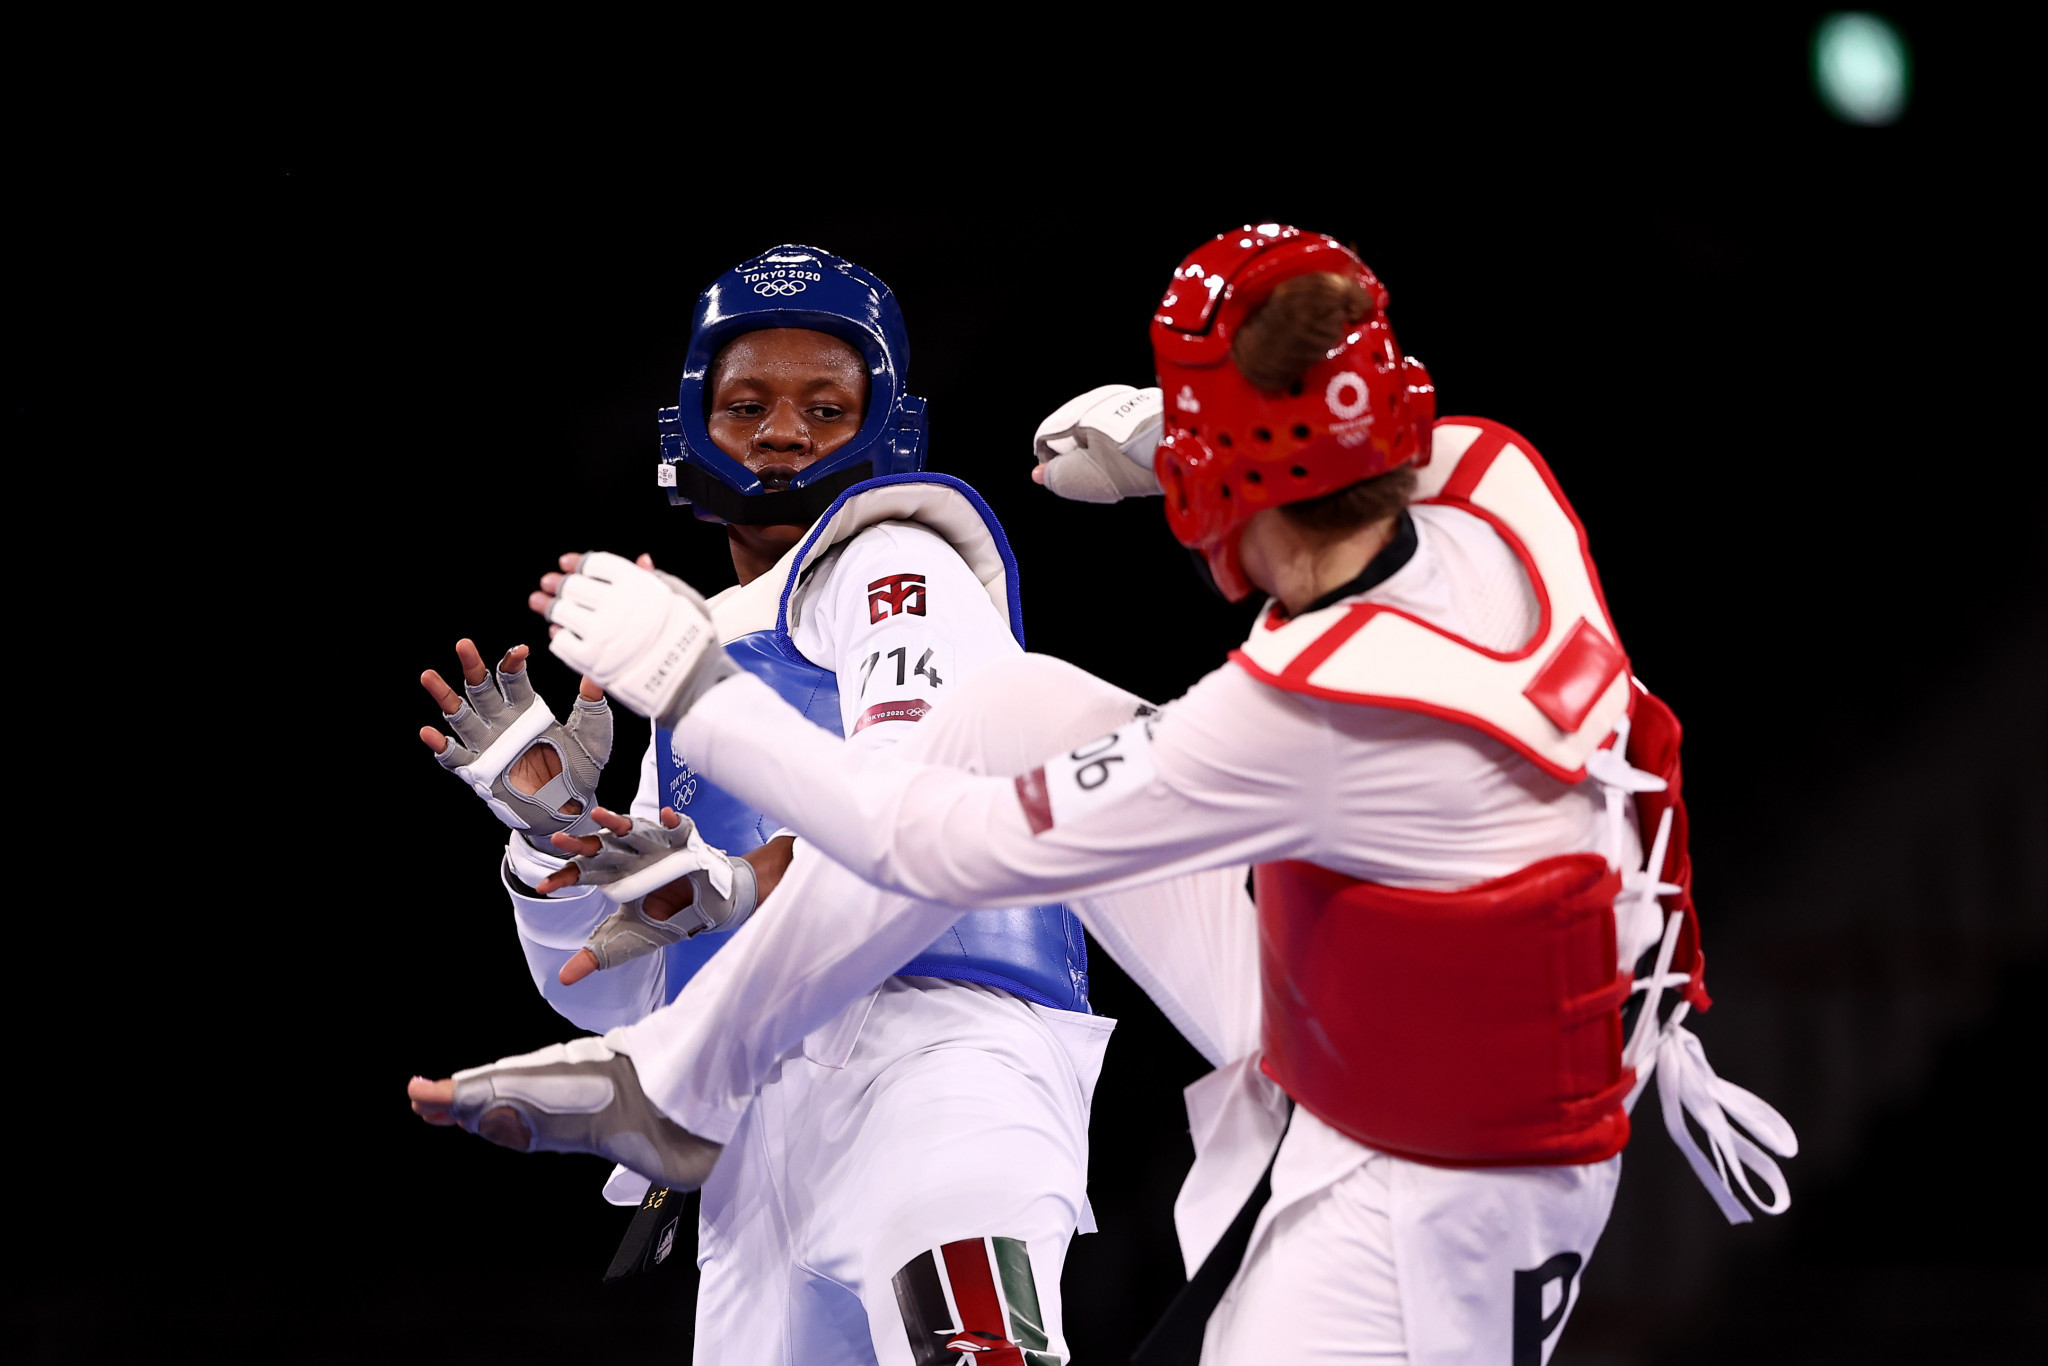 Kenya's Faith Ogallo is attending a taekwondo training camp in the south of France and is predicting she can win a medal at Paris 2024 ©Getty Images